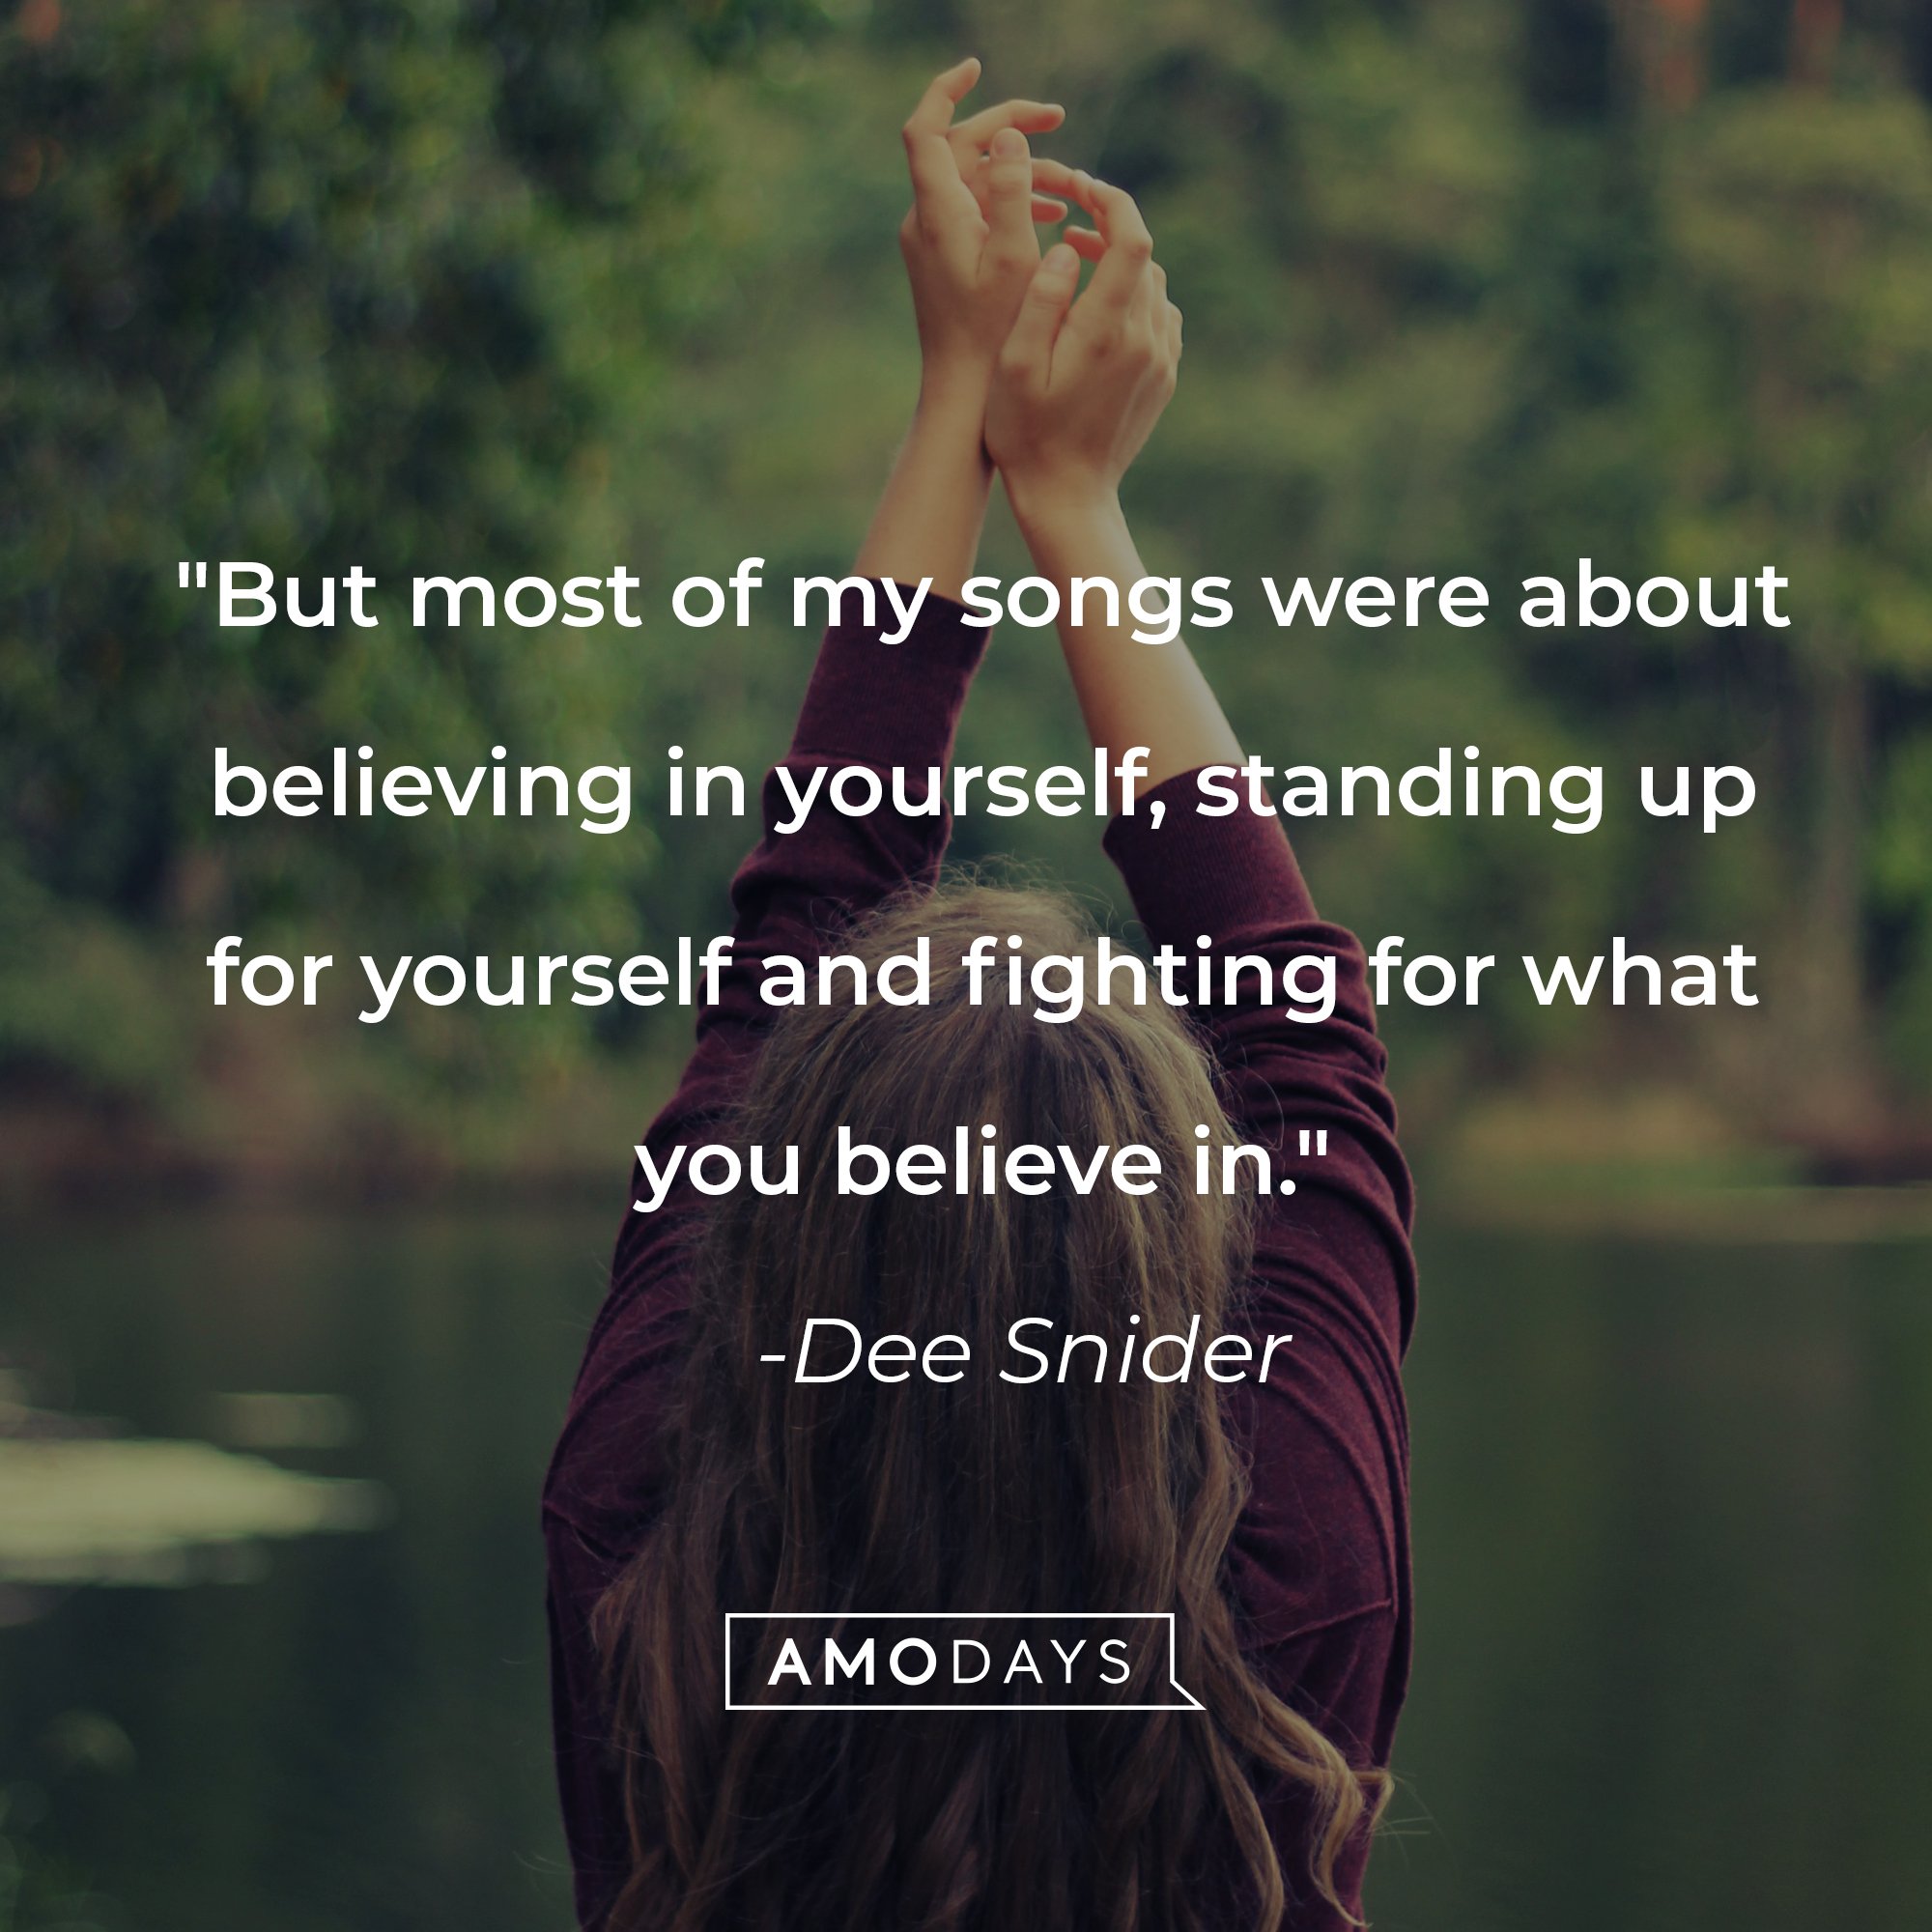 Dee Snider's quote: "But most of my songs were about believing in yourself, standing up for yourself and fighting for what you believe in." | Image: AmoDays